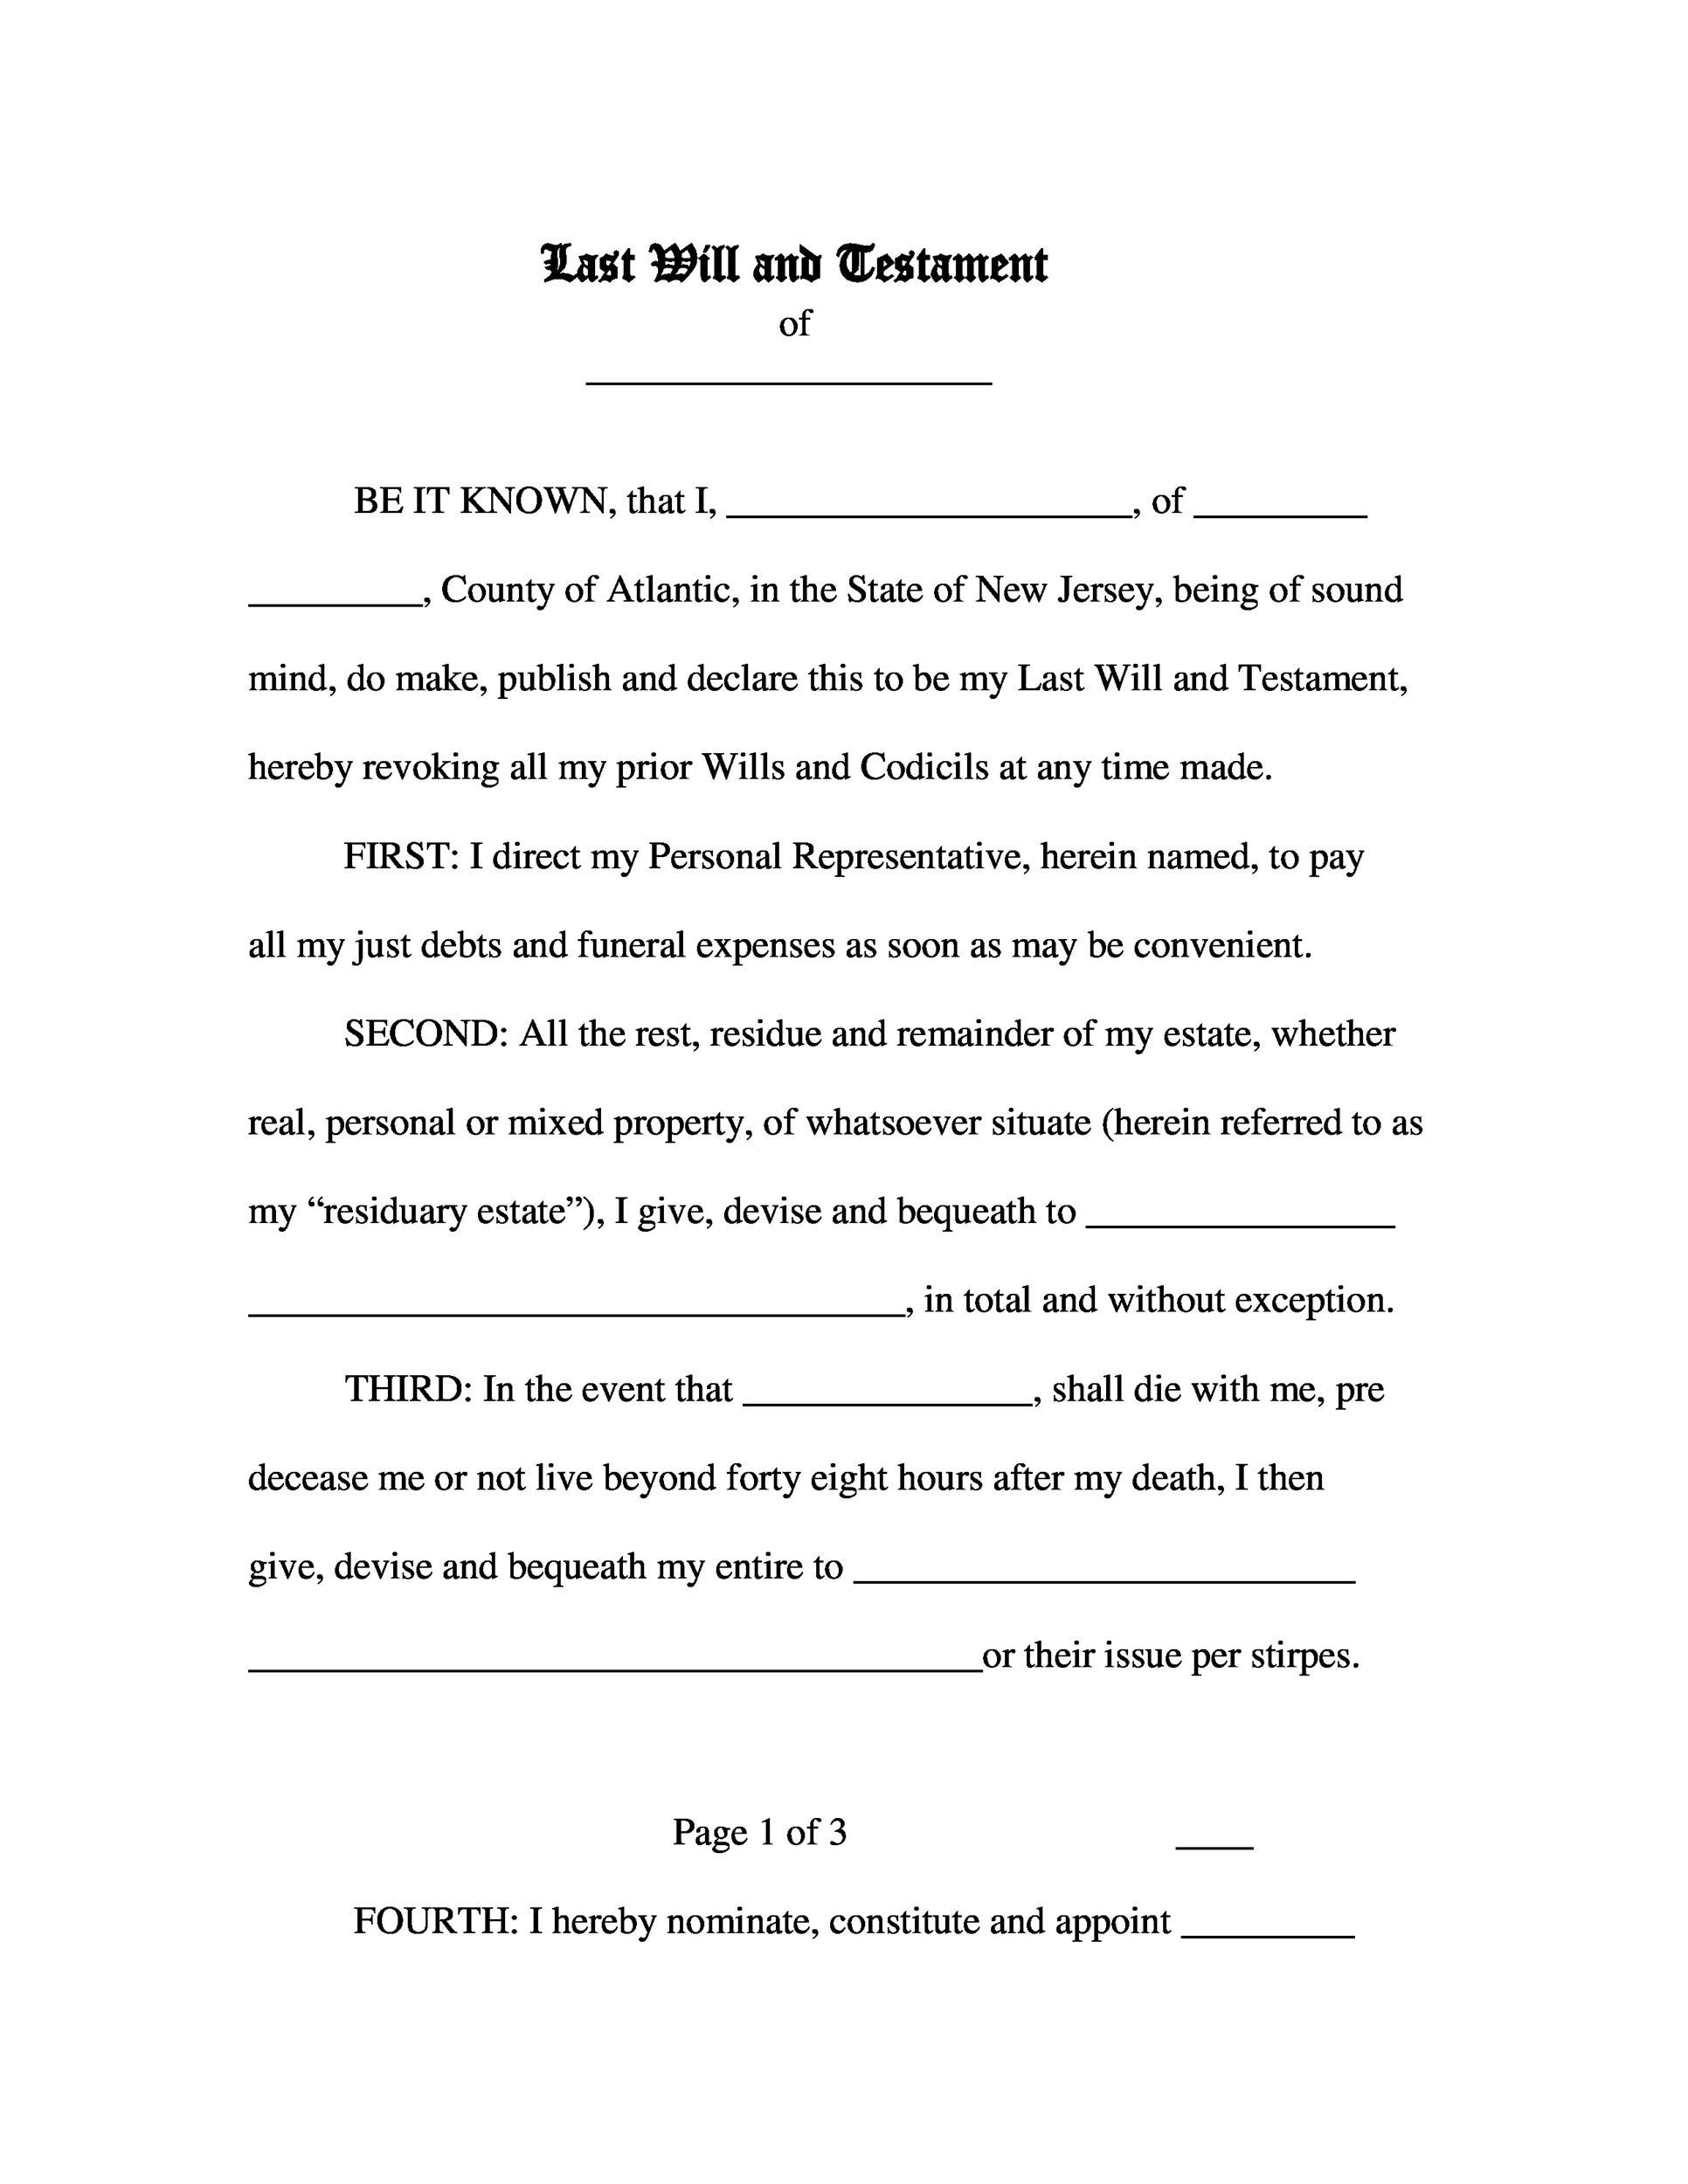 Free Printable Will Forms UK_25144